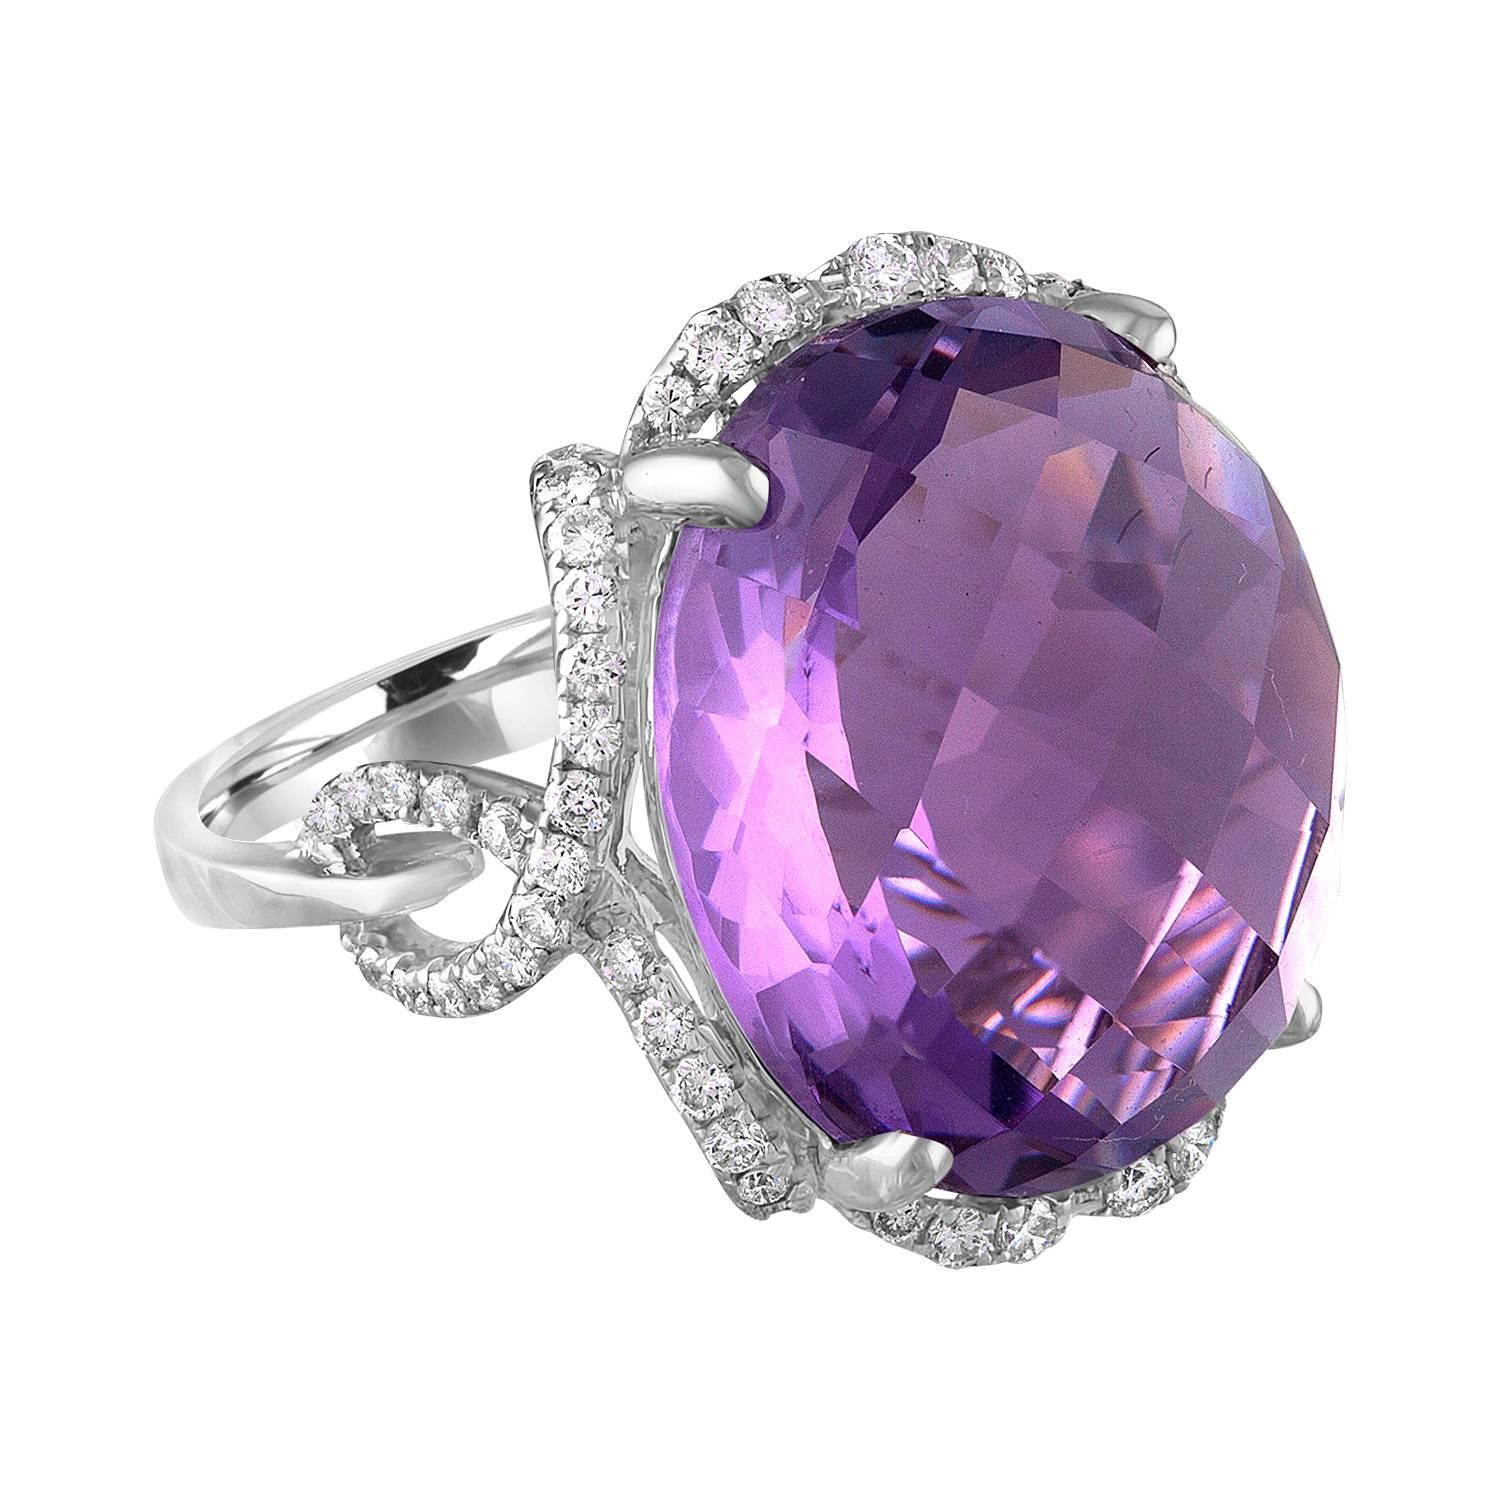 Fun Large Ring.
The ring is 18K White Gold.
There are 0.58 Carats in Diamonds G/H SI.
The Amethyst is 16.55 Carats Faceted Cabochon.
The top measures 0.75